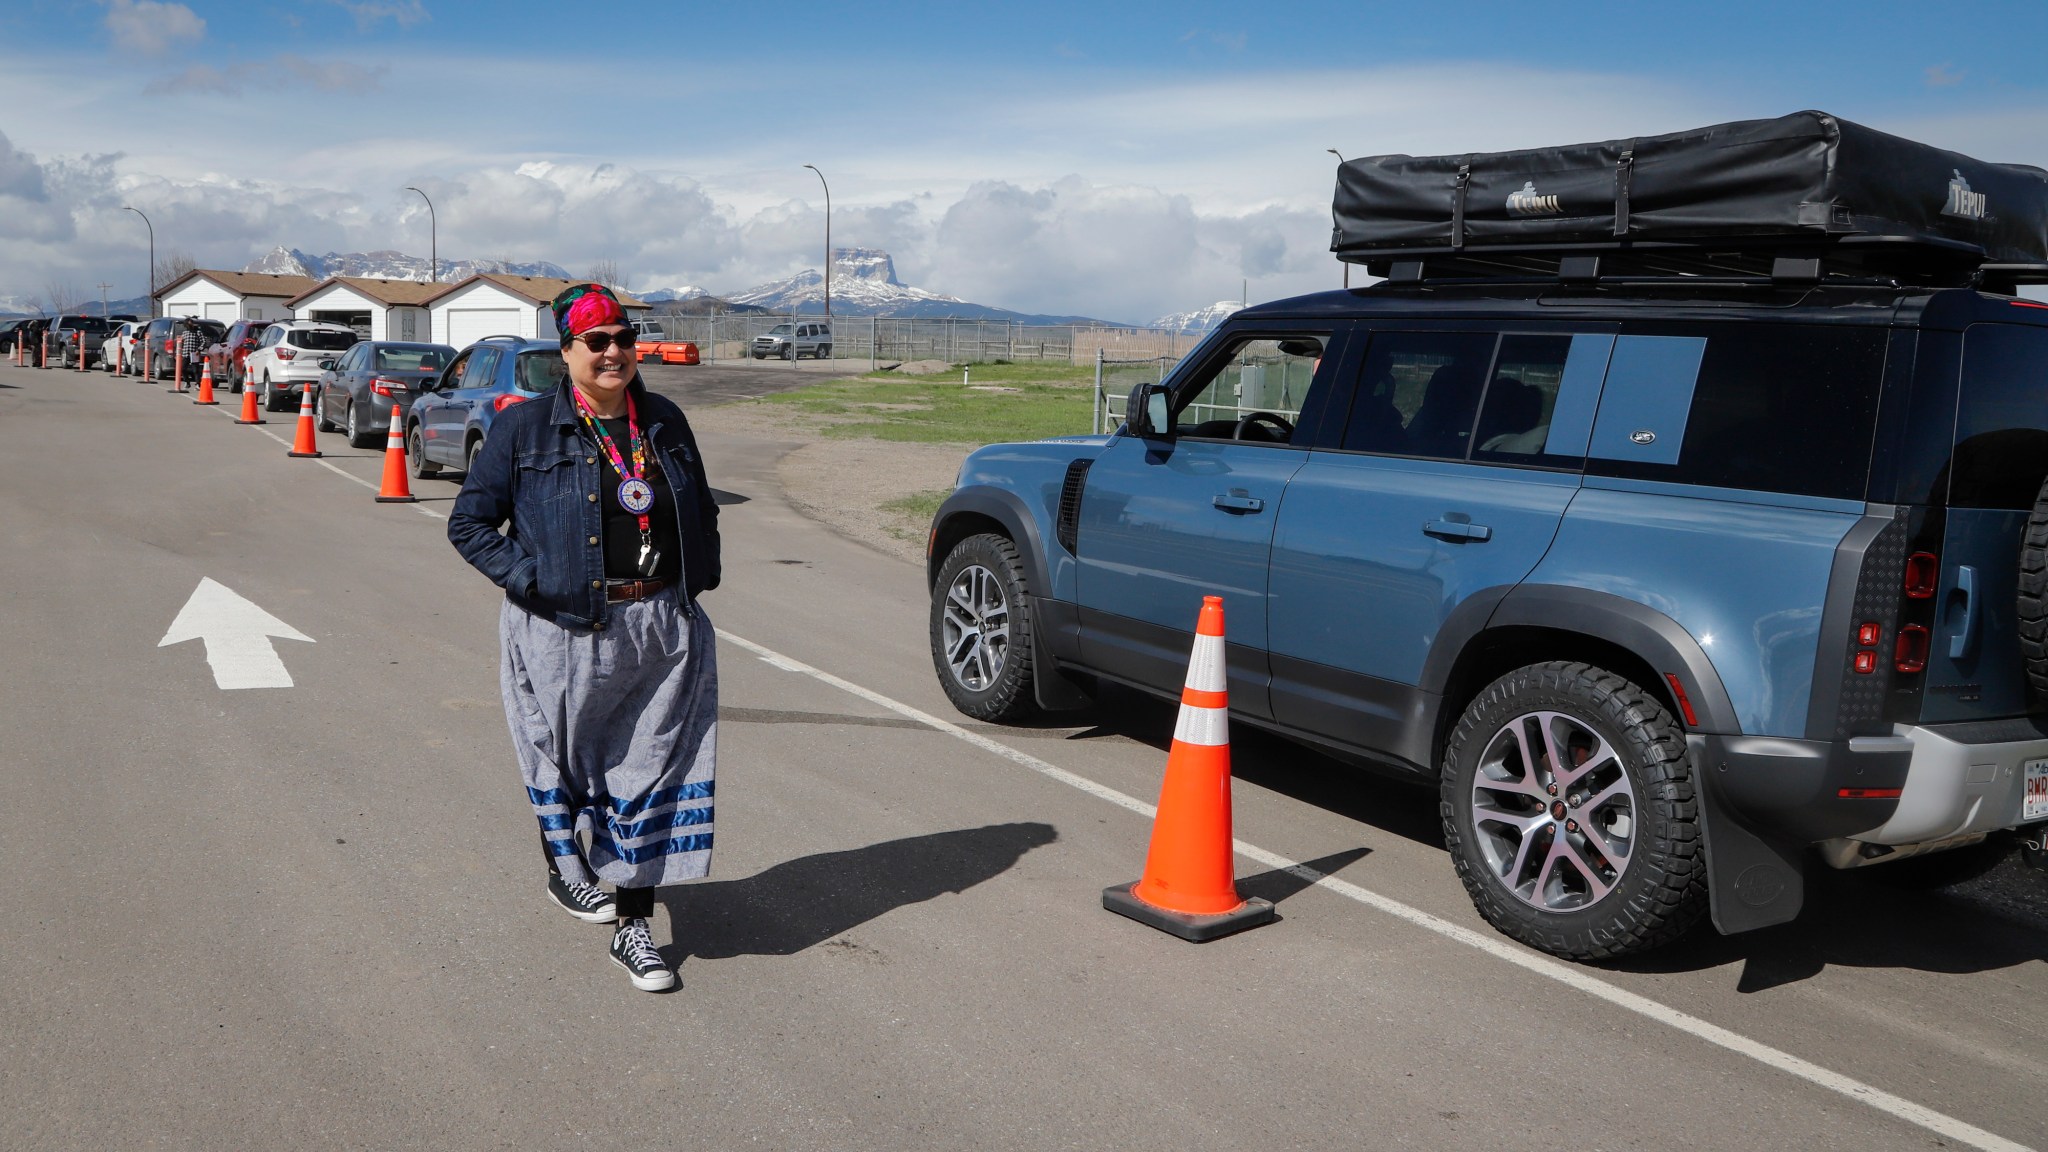 Bonnie Healey, health director for the Blackfoot Confederacy, chats with southern Alberta residents lining up to get shots of a COVID-19 vaccine from a Montana tribe in Carway, Alta., Tuesday, May 18, 2021.